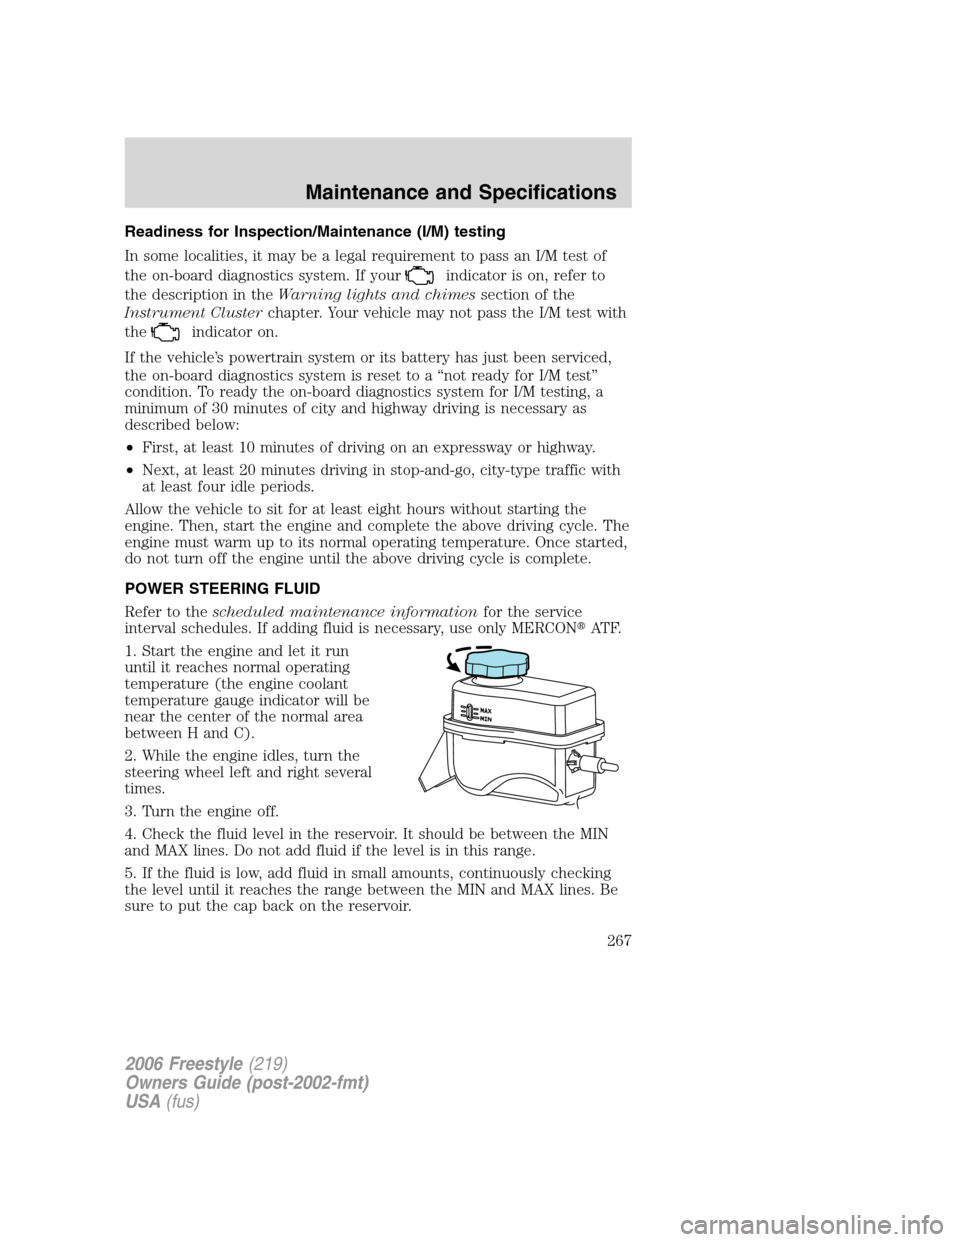 FORD FREESTYLE 2006 1.G Owners Guide Readiness for Inspection/Maintenance (I/M) testing
In some localities, it may be a legal requirement to pass an I/M test of
the on-board diagnostics system. If your
indicator is on, refer to
the descr